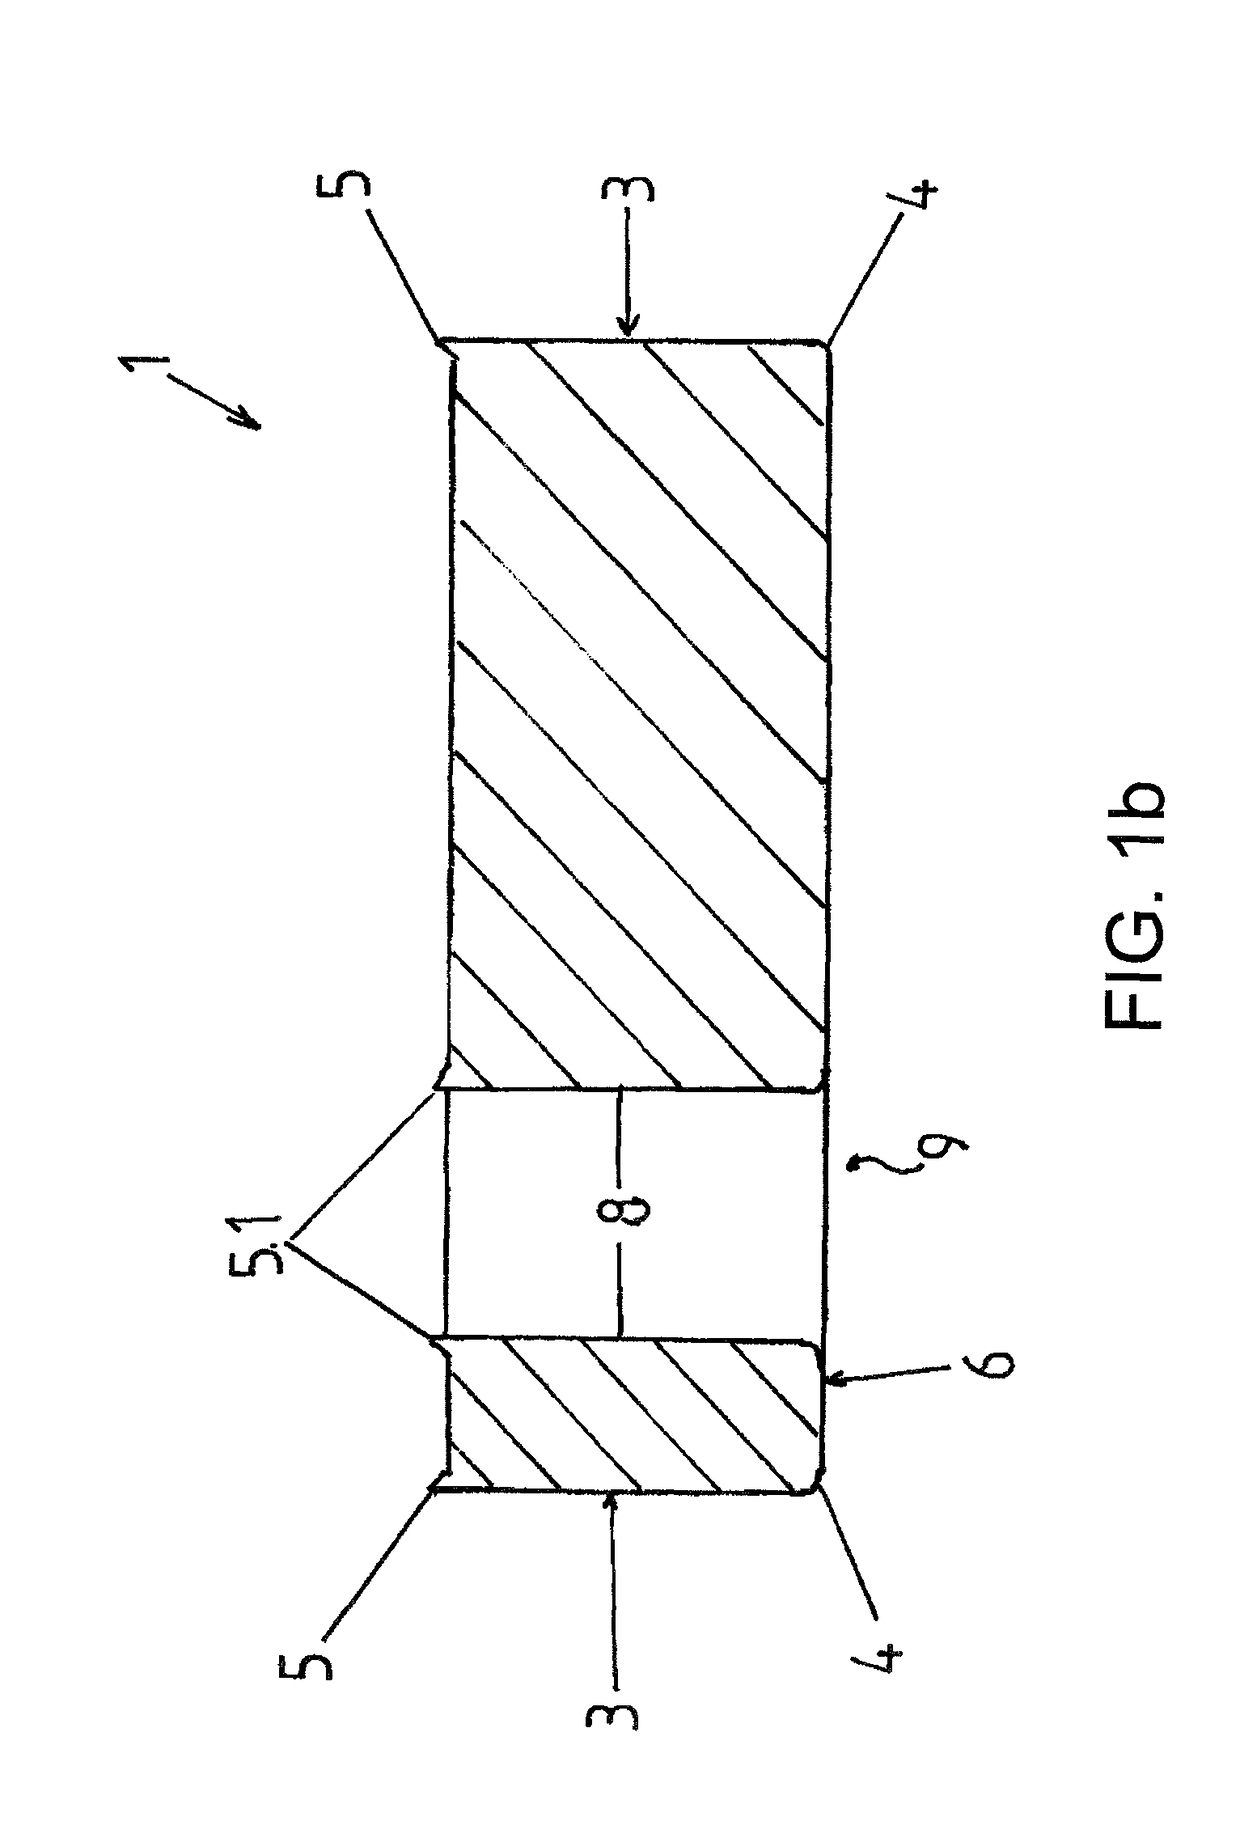 Device and method for shaping sheared edges on stamped or fine-blanked parts having a burr